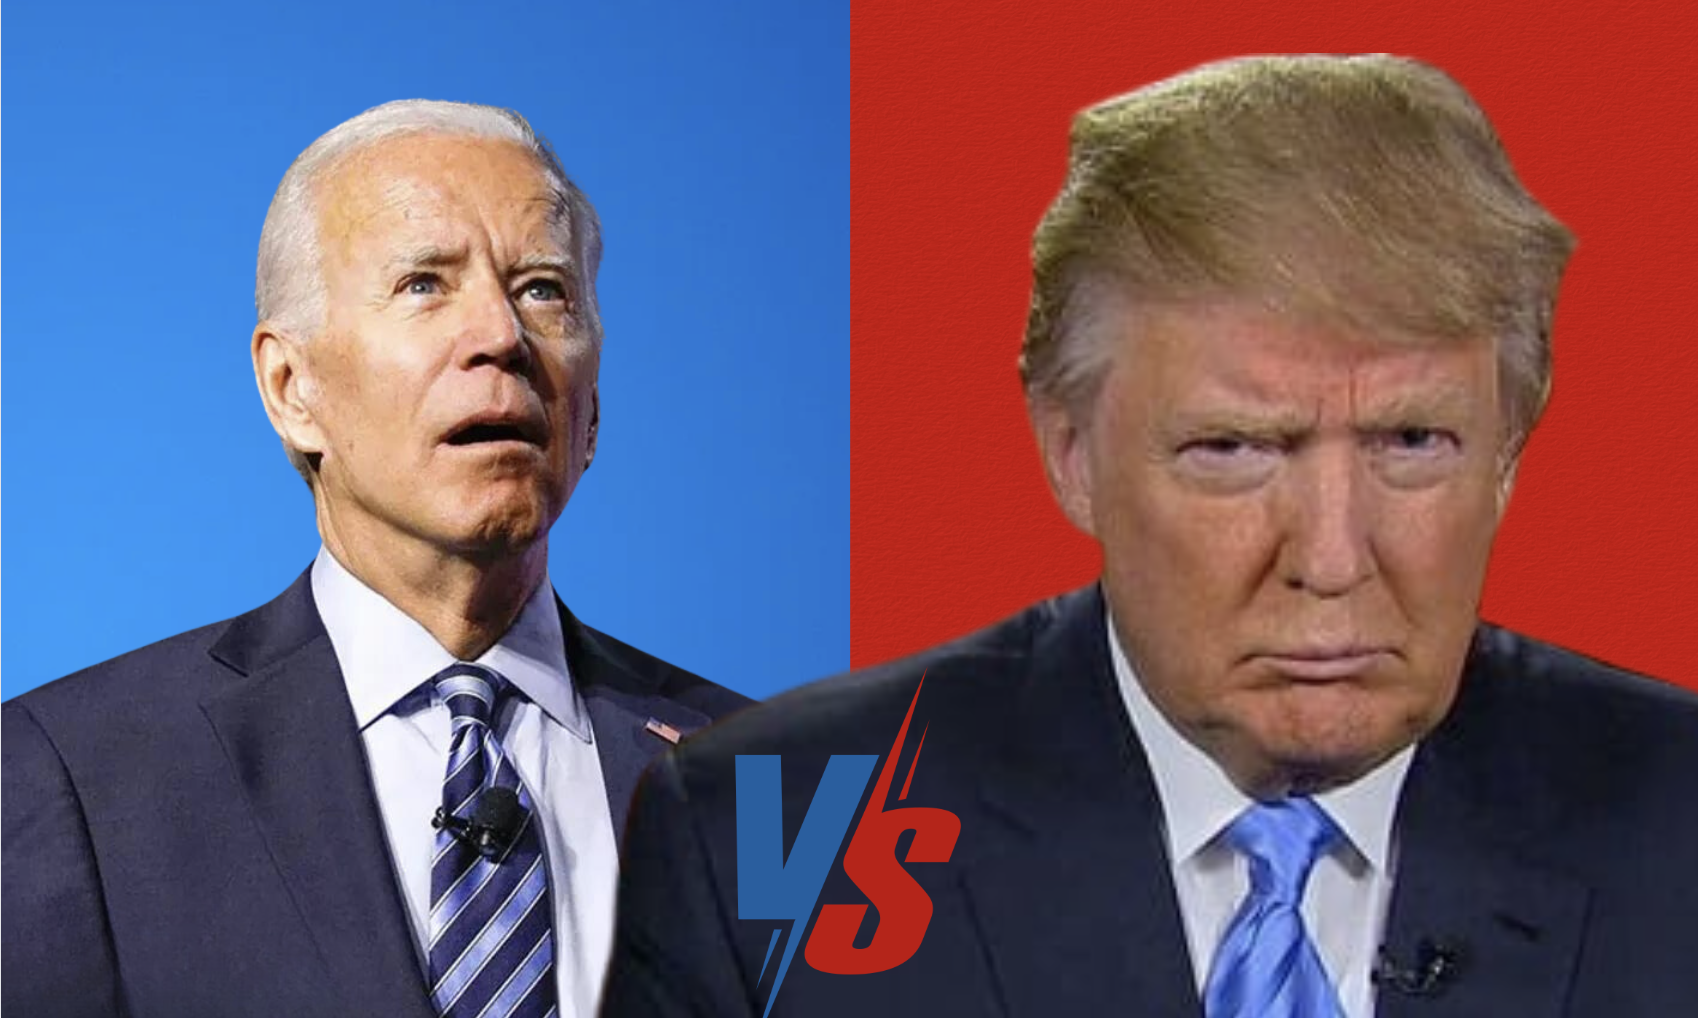 Biden Gets Alarming News, But Nothing A Little Cheating Can’t Solve